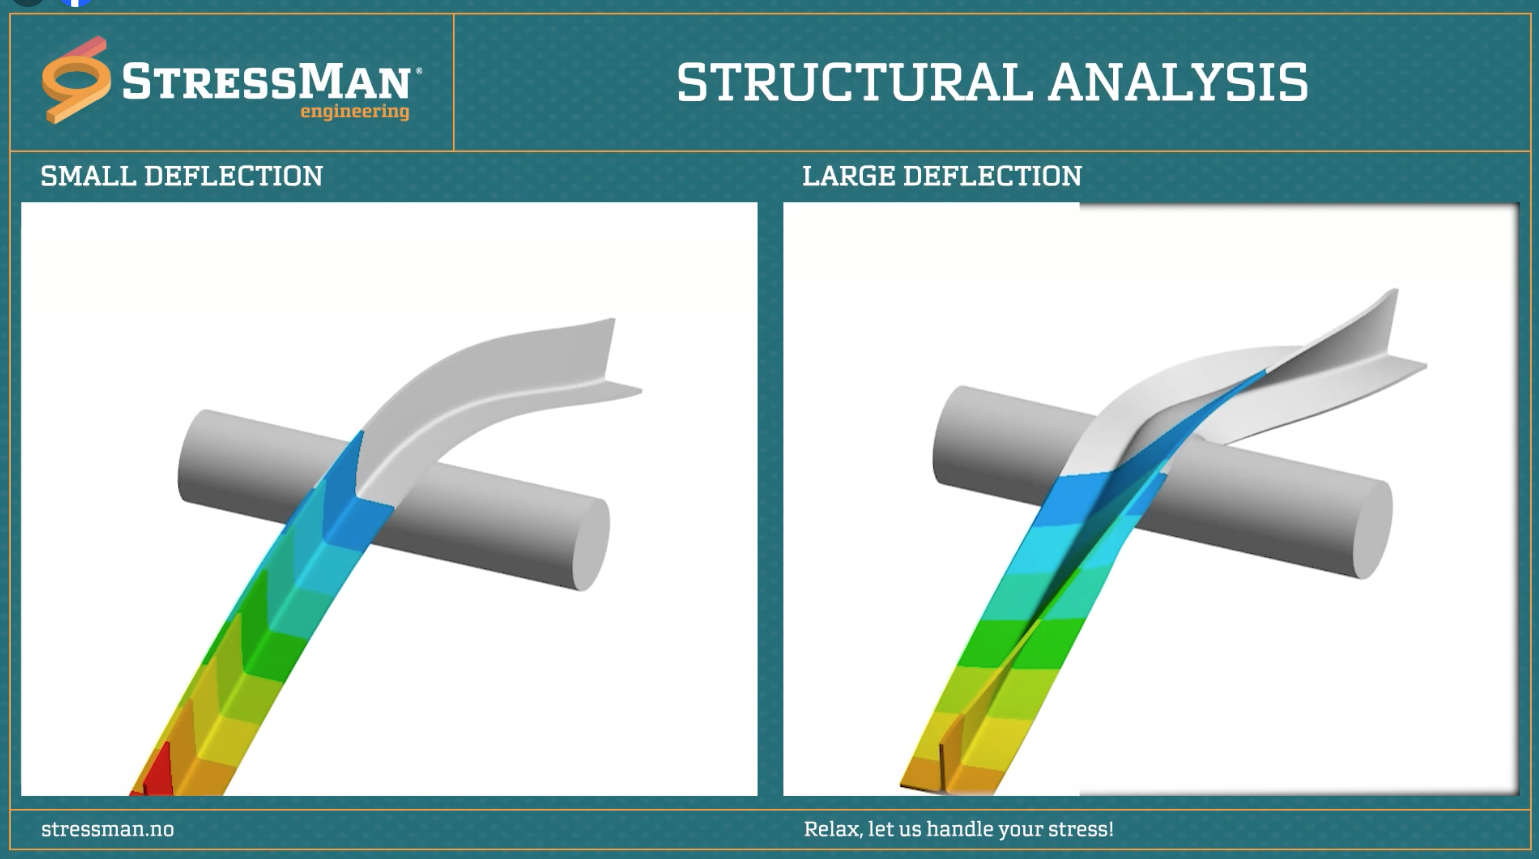 Structural Analysis: Small Deflection vs. Large Deflection